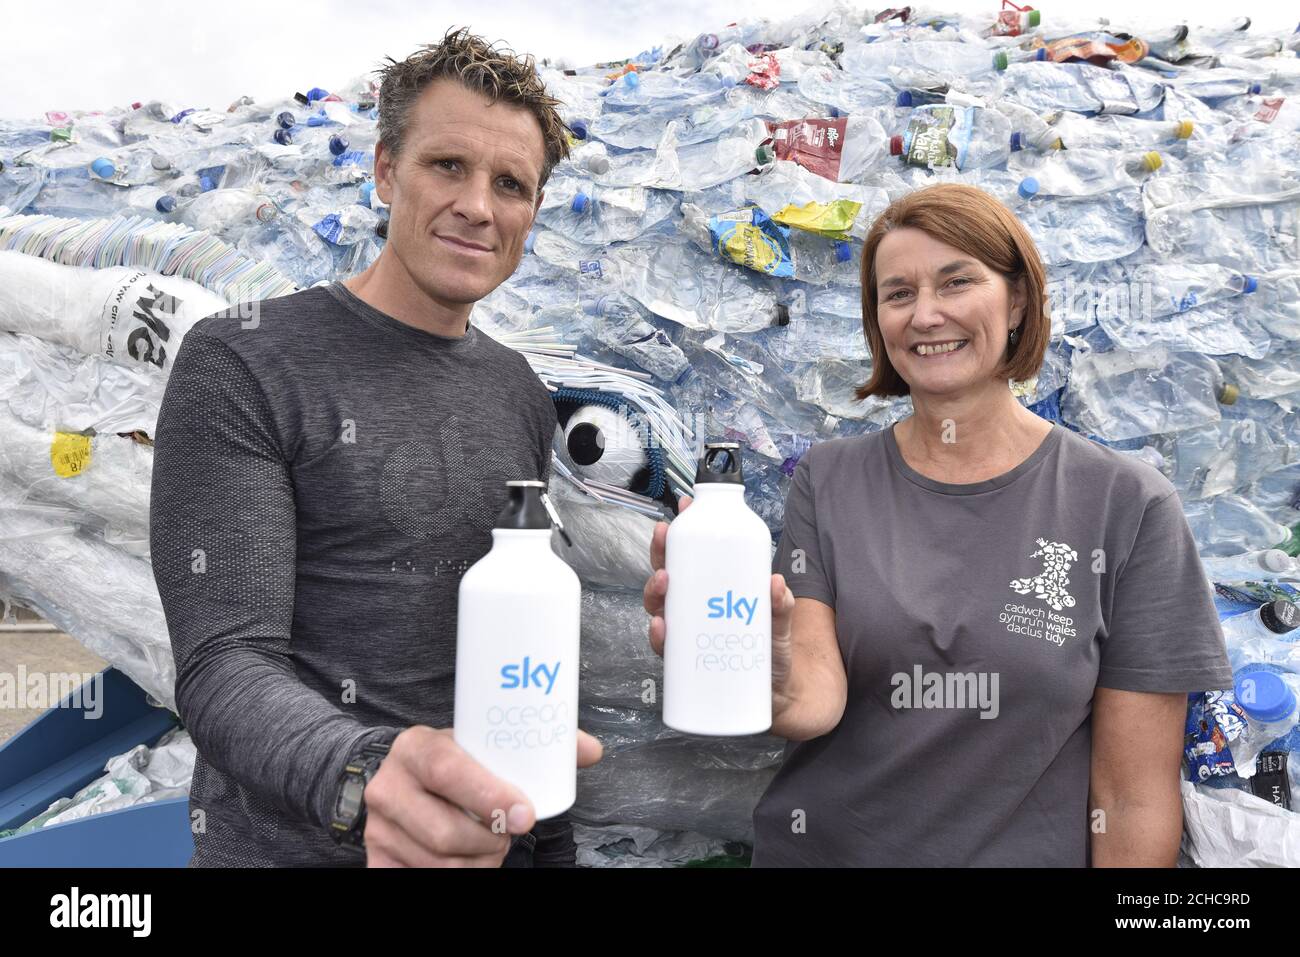 EDITORIAL USE ONLY Double Olympic gold medalist rower James Cracknell with Keep Wales Tidy Chief Executive Lesley Jones join Sky Ocean Rescue to unveil a 10-metre long whale in Cardiff Bay, Wales, which is made entirely from recycled plastic recovered from the ocean, beach cleans and local reCycling plants to raise awareness of the issue of ocean health. Stock Photo